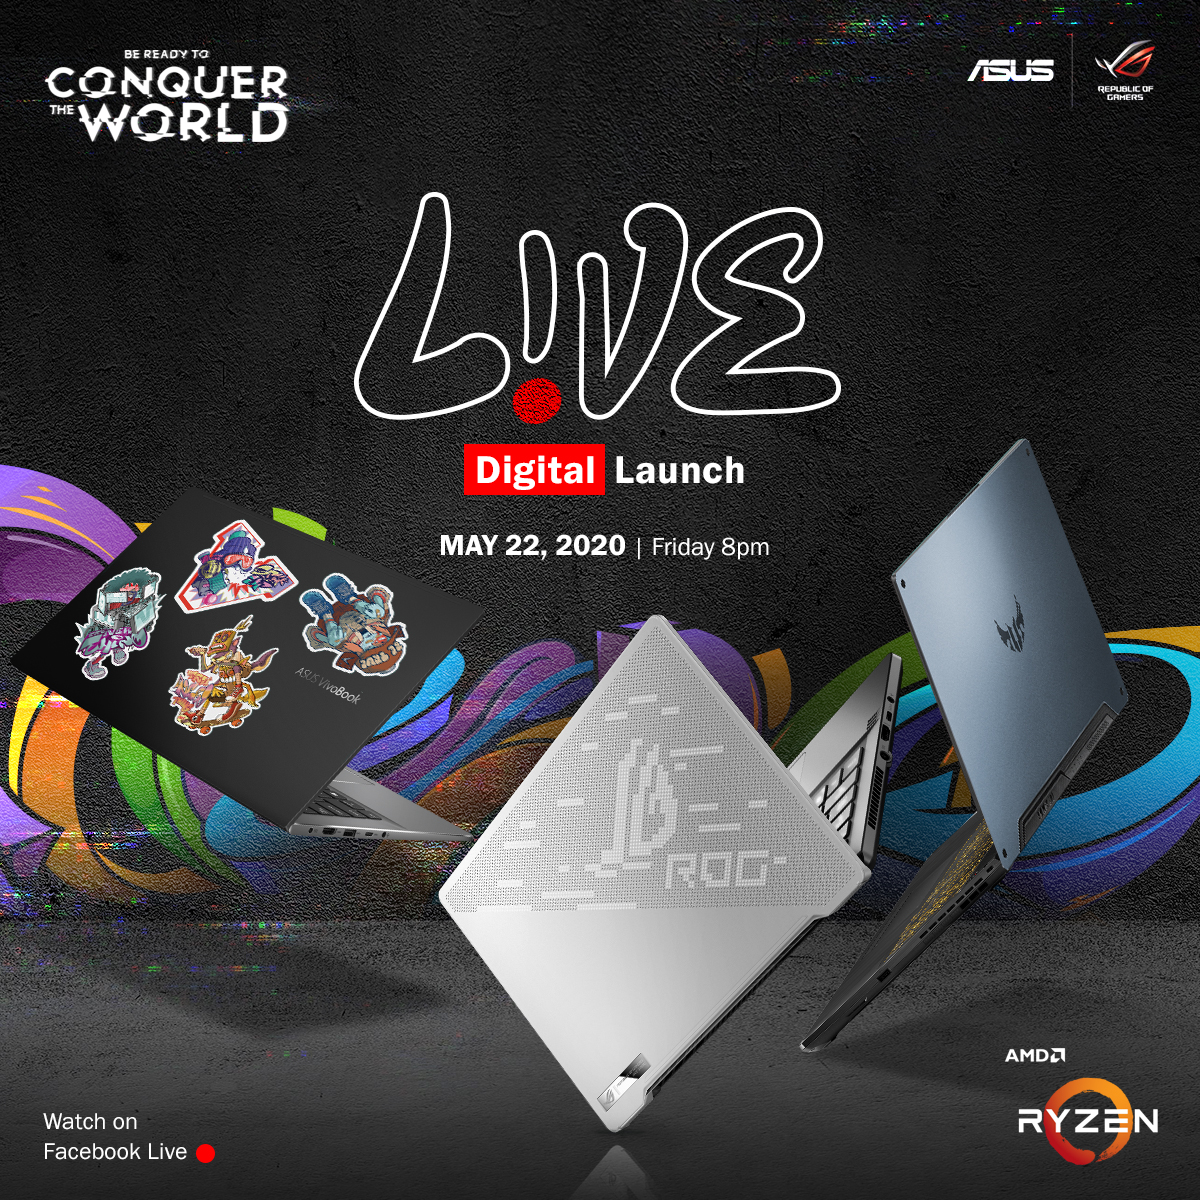 #ConquerTheWorld as ASUS and ROG Philippines Launch its AMD line-up of Consumer and Gaming Laptops this May 22!